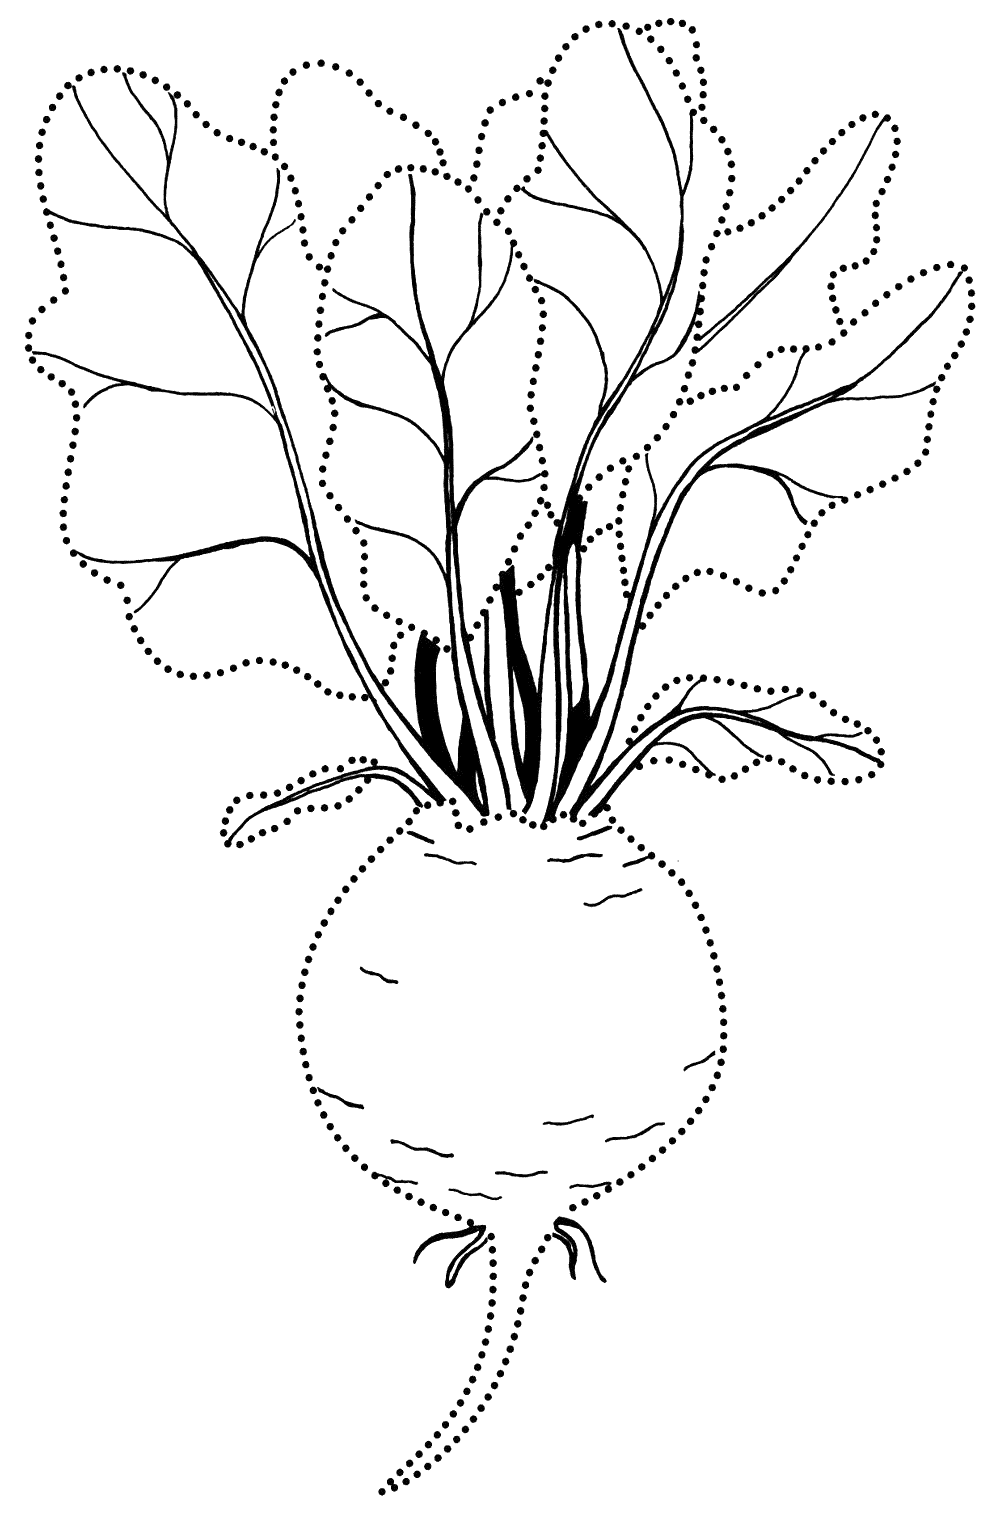 Coloring page - Beet classic